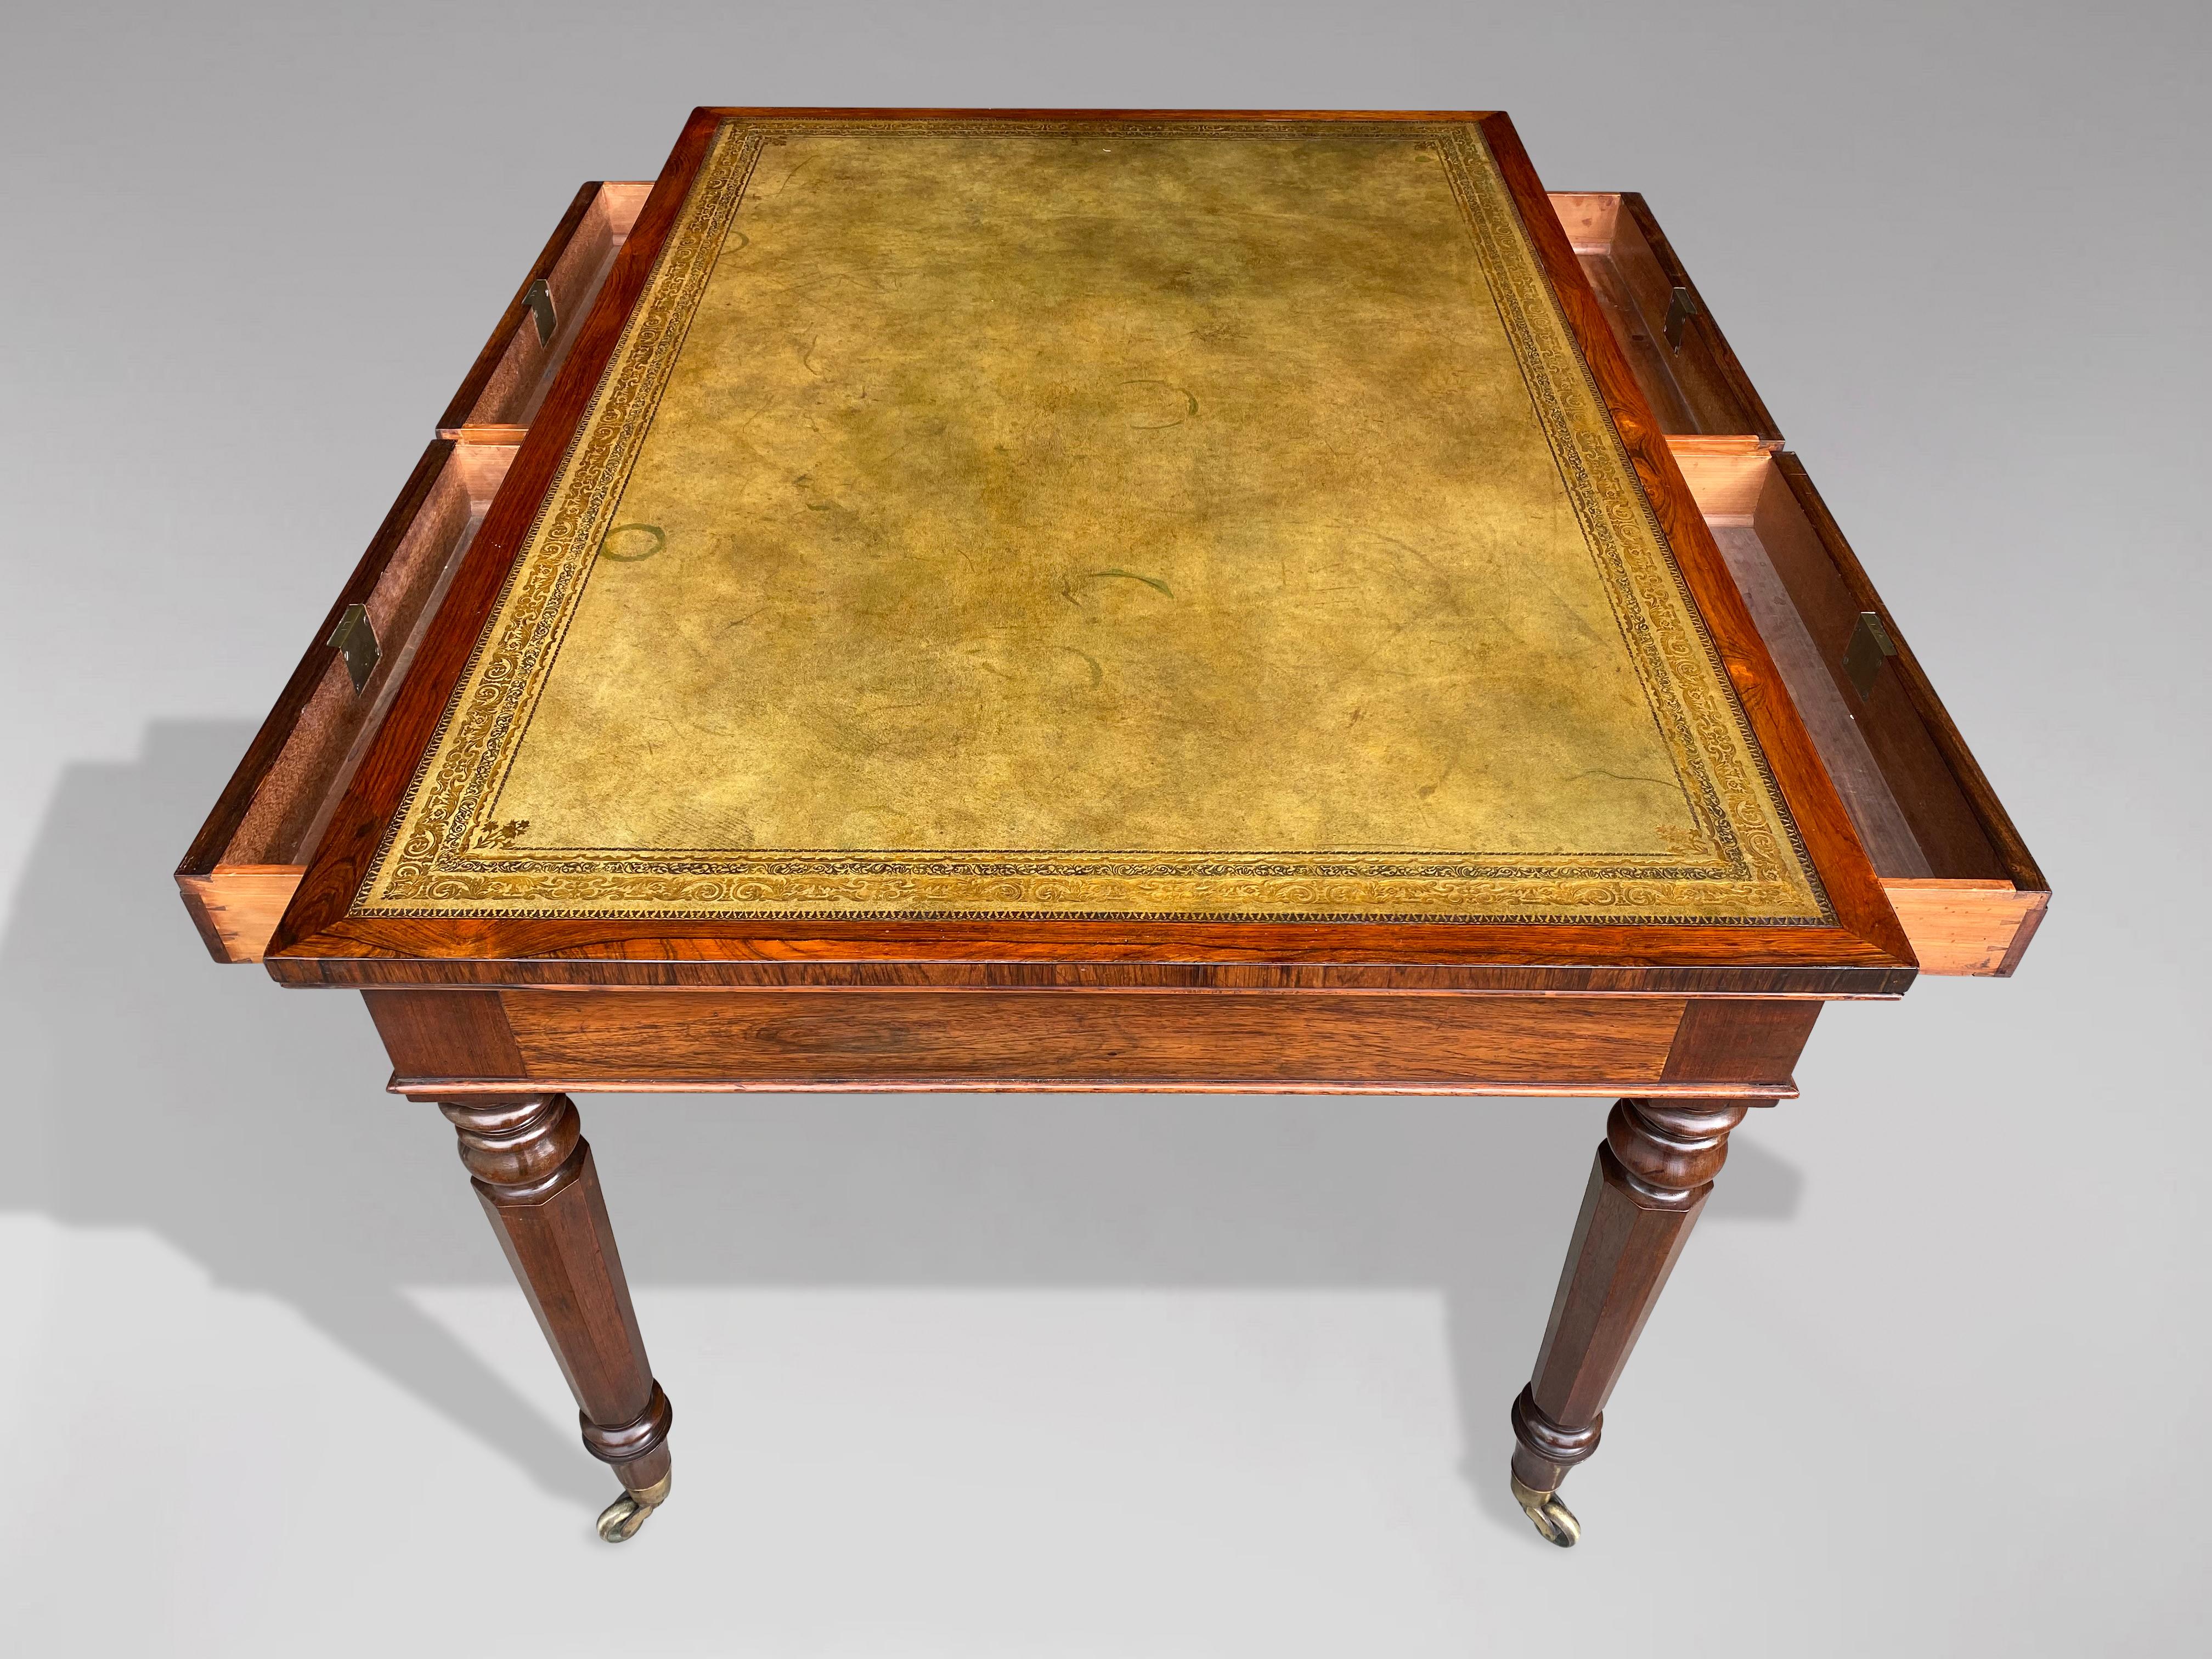 19th Century, Regency Period Rosewood Partners Writing Table In Good Condition In Petworth,West Sussex, GB